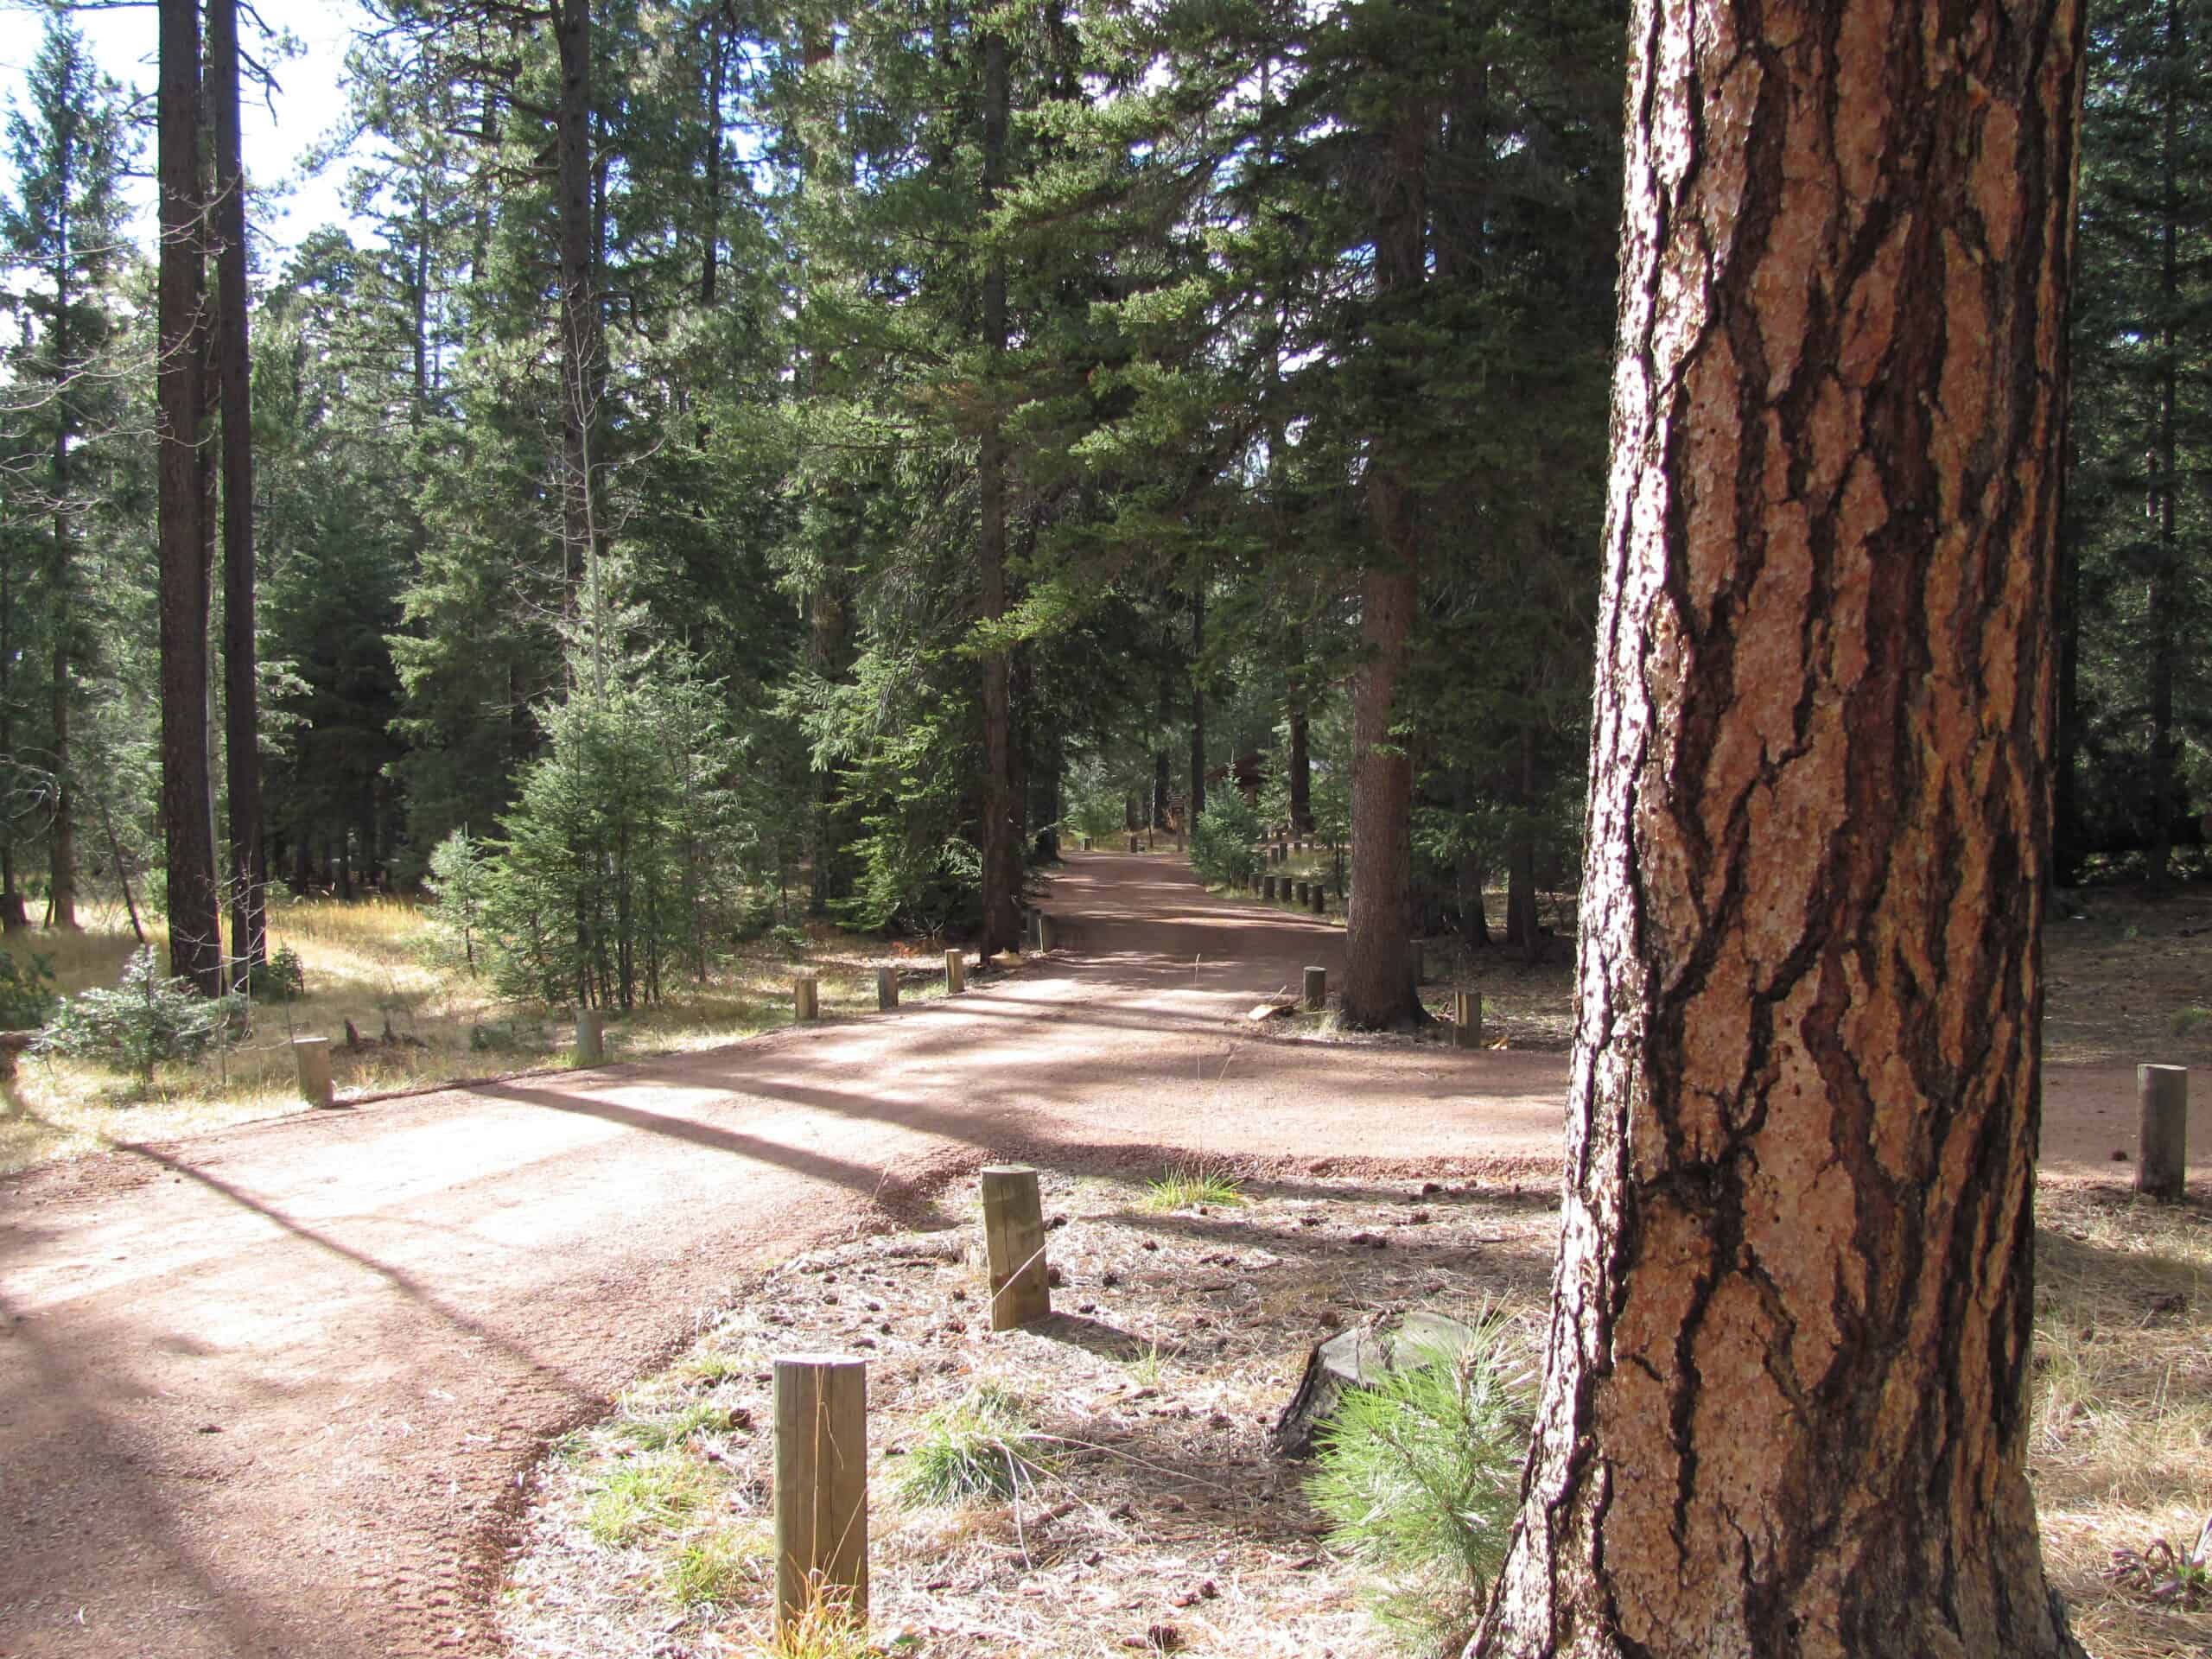 Access #1 (34 miles east of Payson): From Payson, travel east for 24 miles on State Hwy 260. Turn right on Colcord Road 291 and travel 3 miles to FR 200. Turn right on unpaved FR 200. Travel on FR 200 for 6 miles, through Haigler Canyon Recreation Site to FR 202A. Turn right and follow this unpaved road for ½ mile to the site. Access #2 (12 miles north of Young): From Young, travel 3 miles north on State Hwy.288/Forest Road (FR) 512 to FR 200. Turn left on FR 200 and travel for 9 miles to the site. View and download a map.